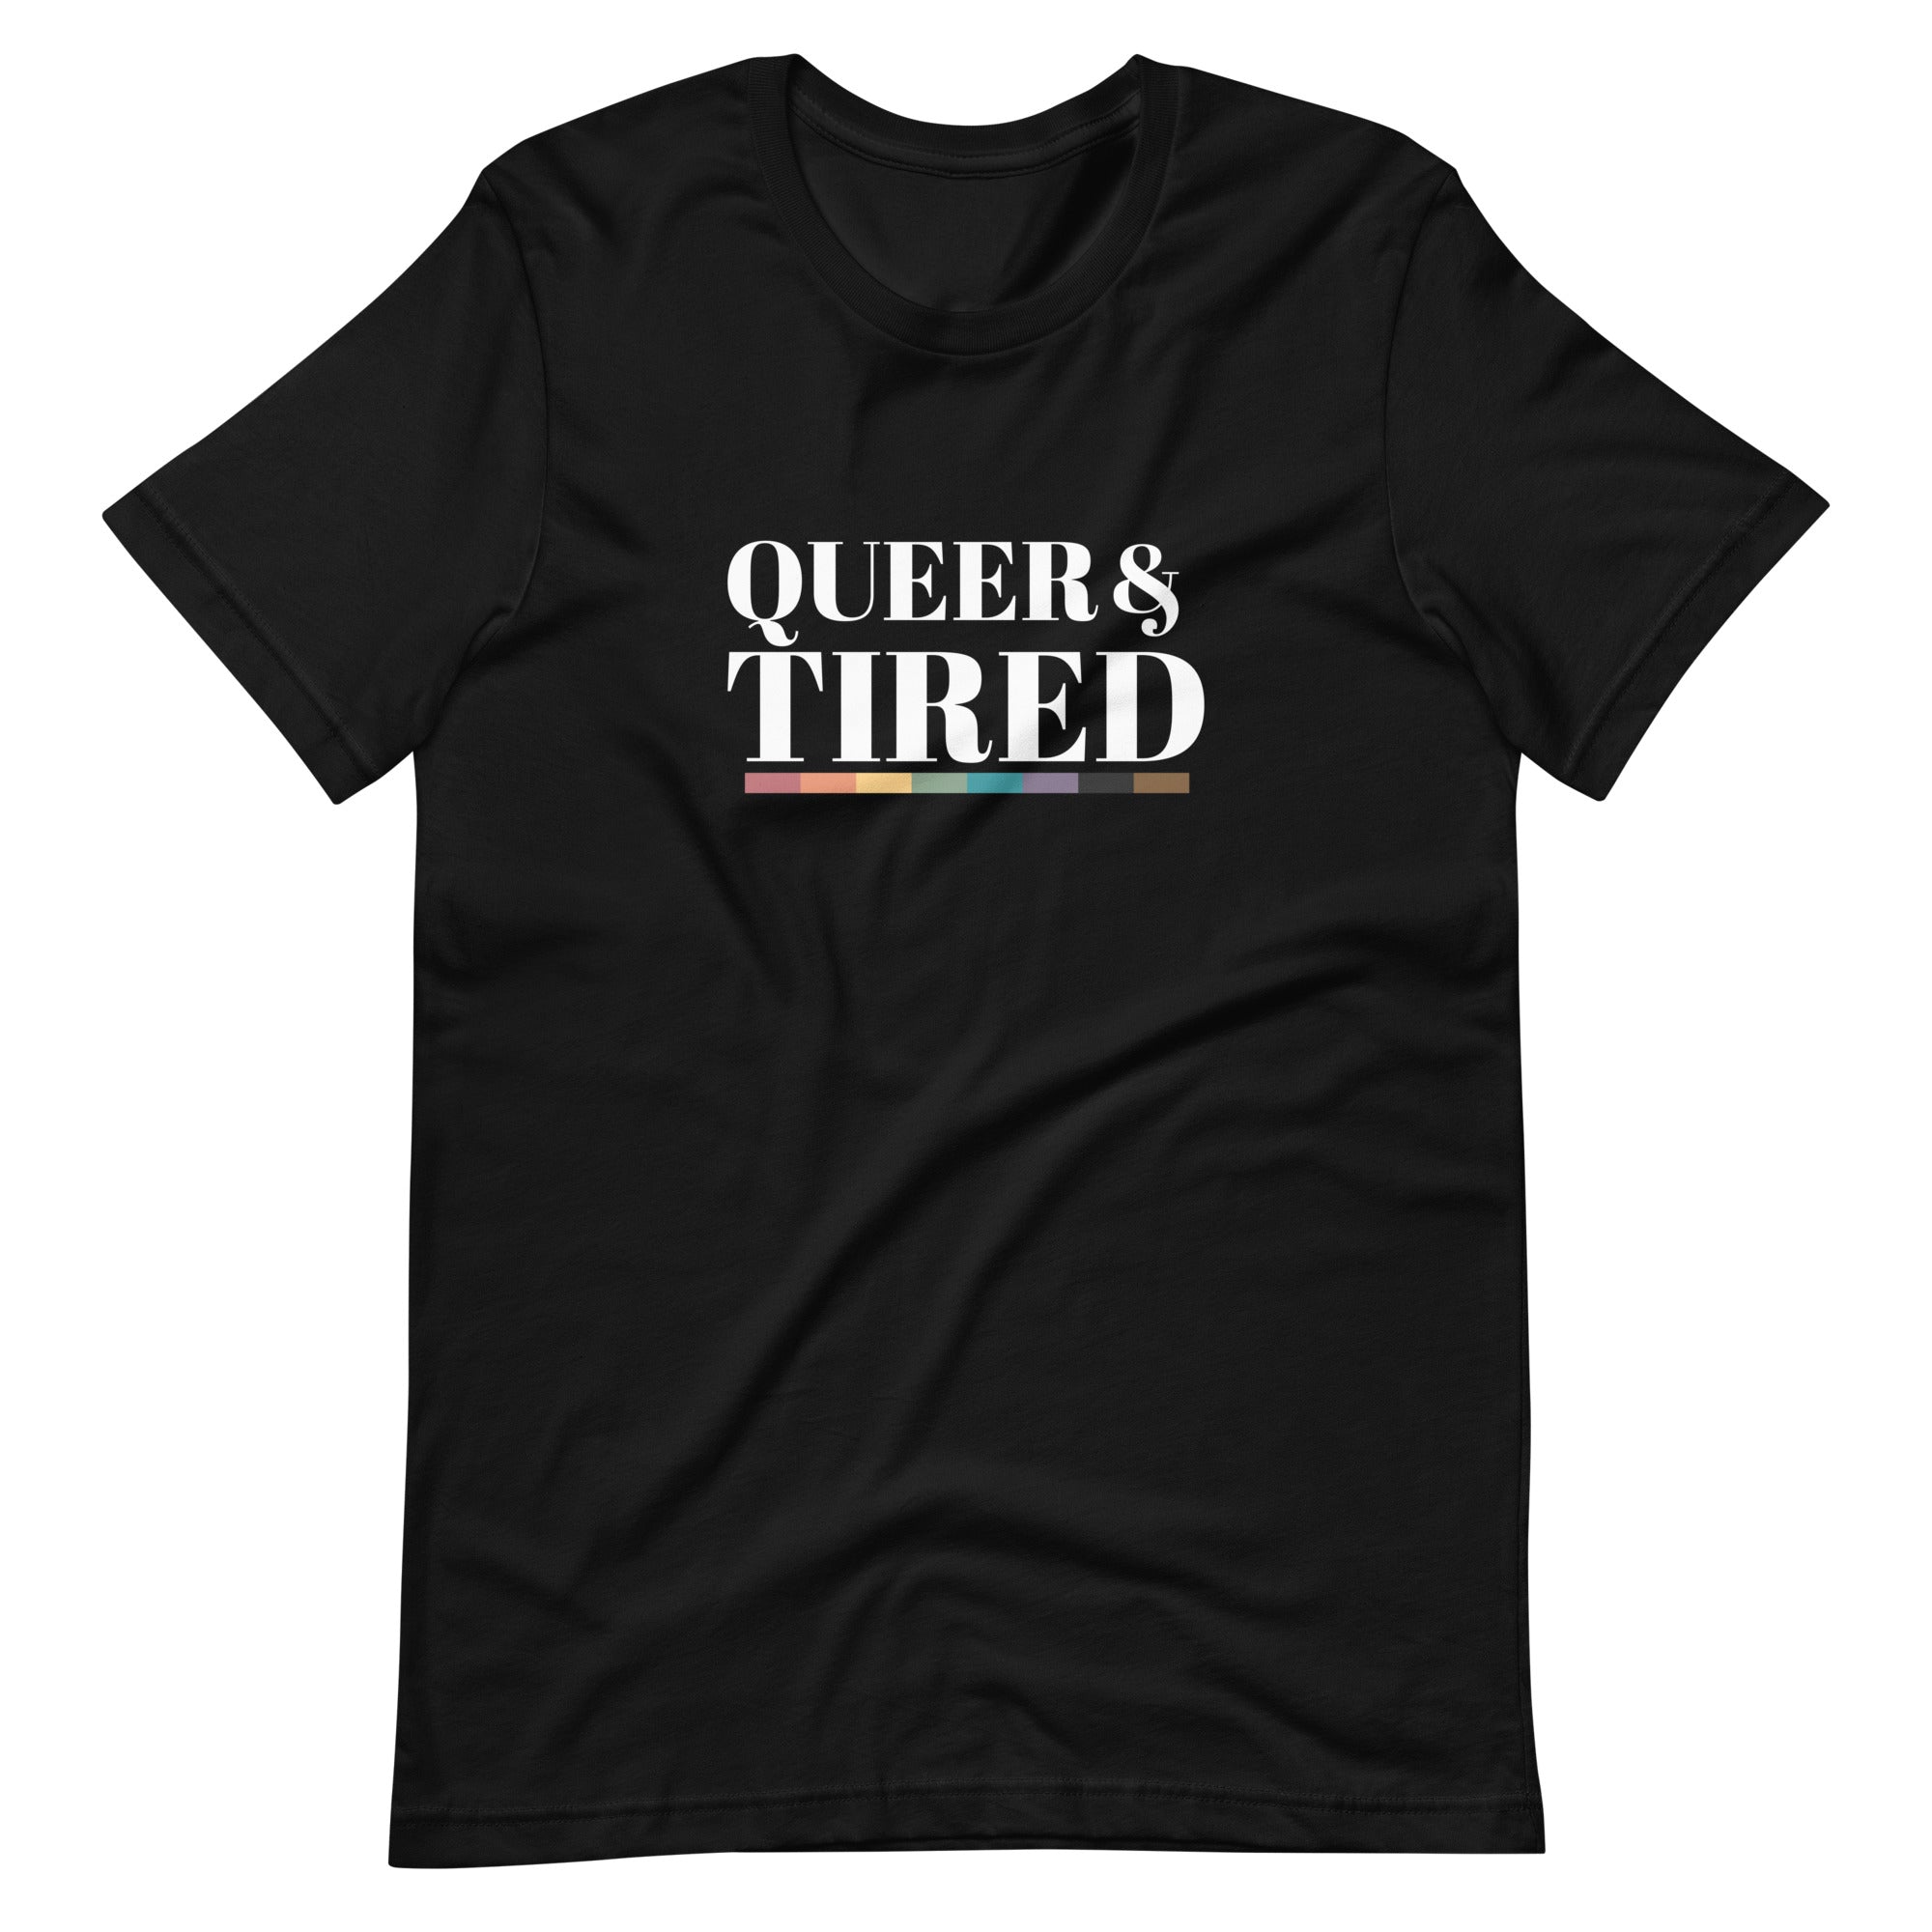 Queer & Tired Unisex T-Shirt